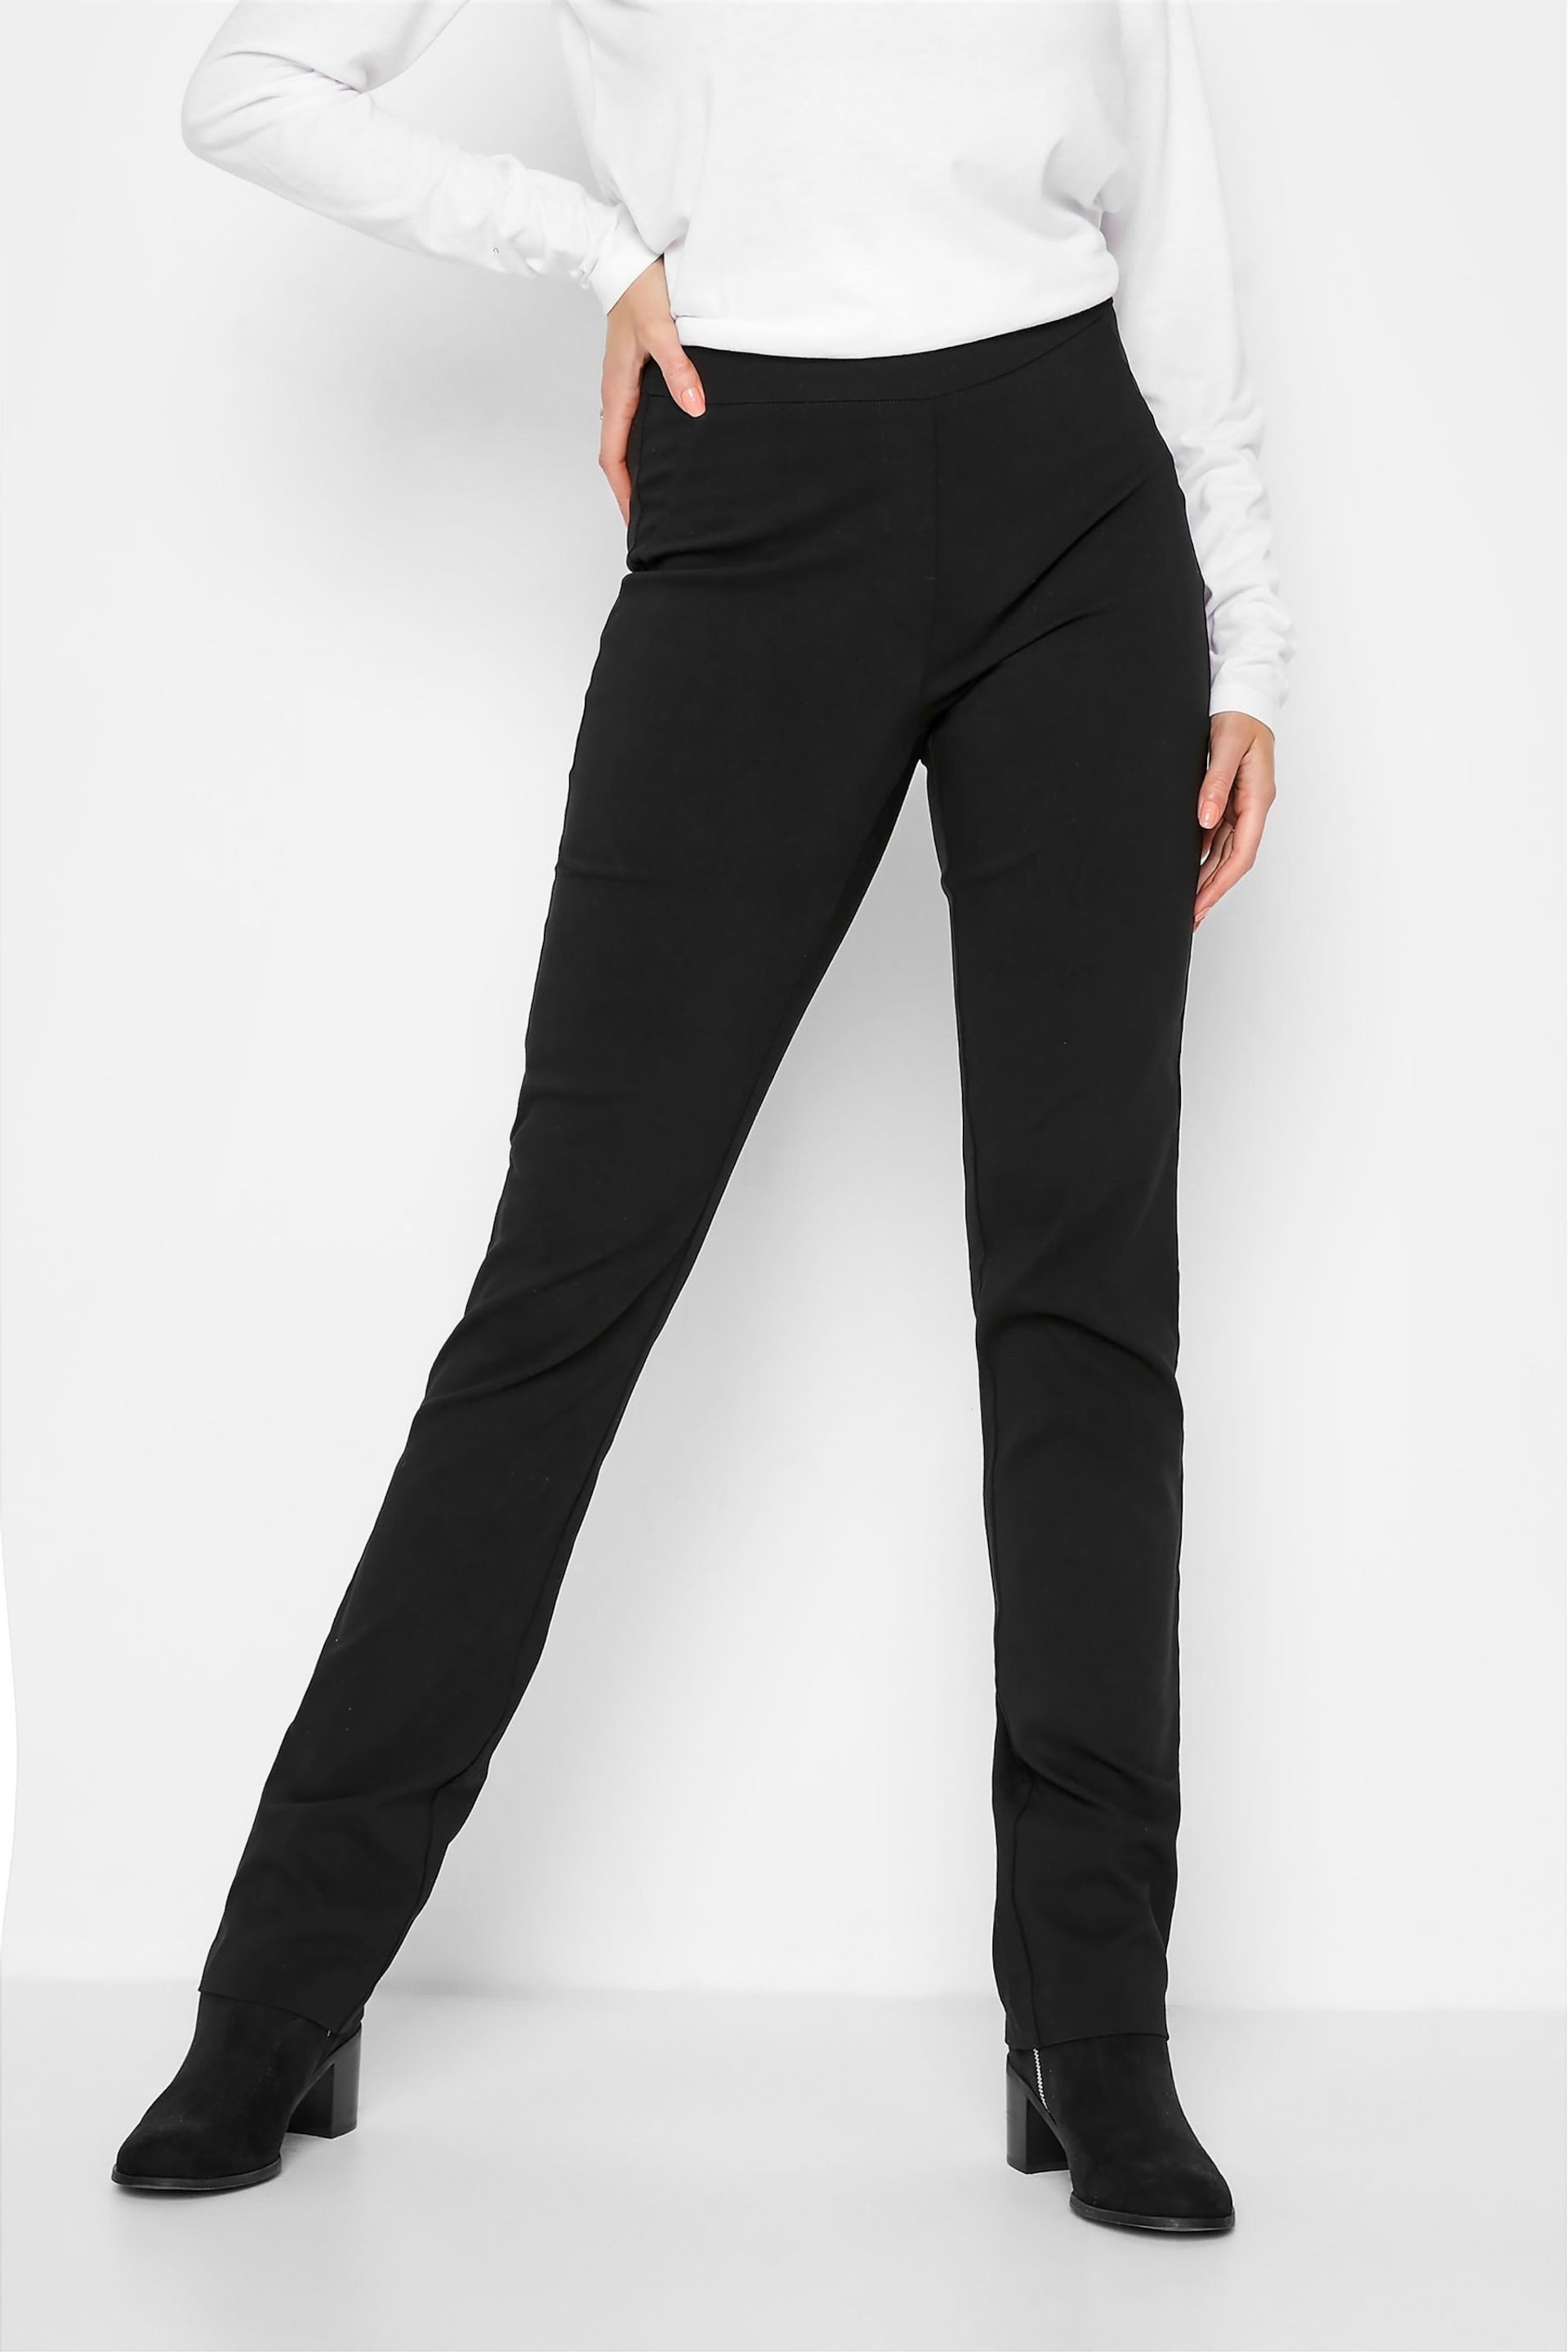 Long Tall Sally Black Stretch Straight Leg Trousers - Image 1 of 4